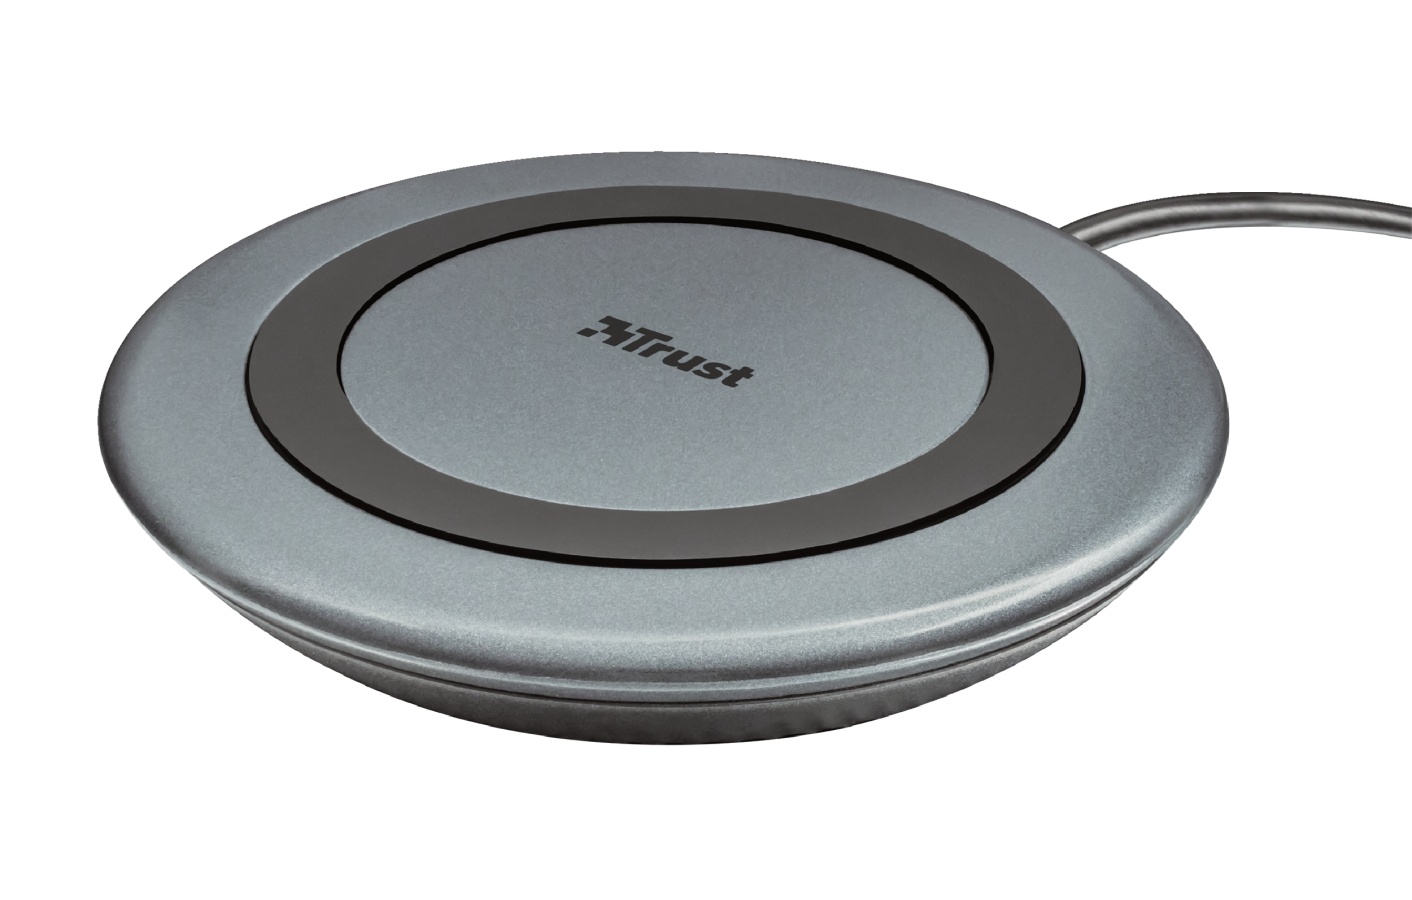 Trust Yudo10 Fast Wireless Charger